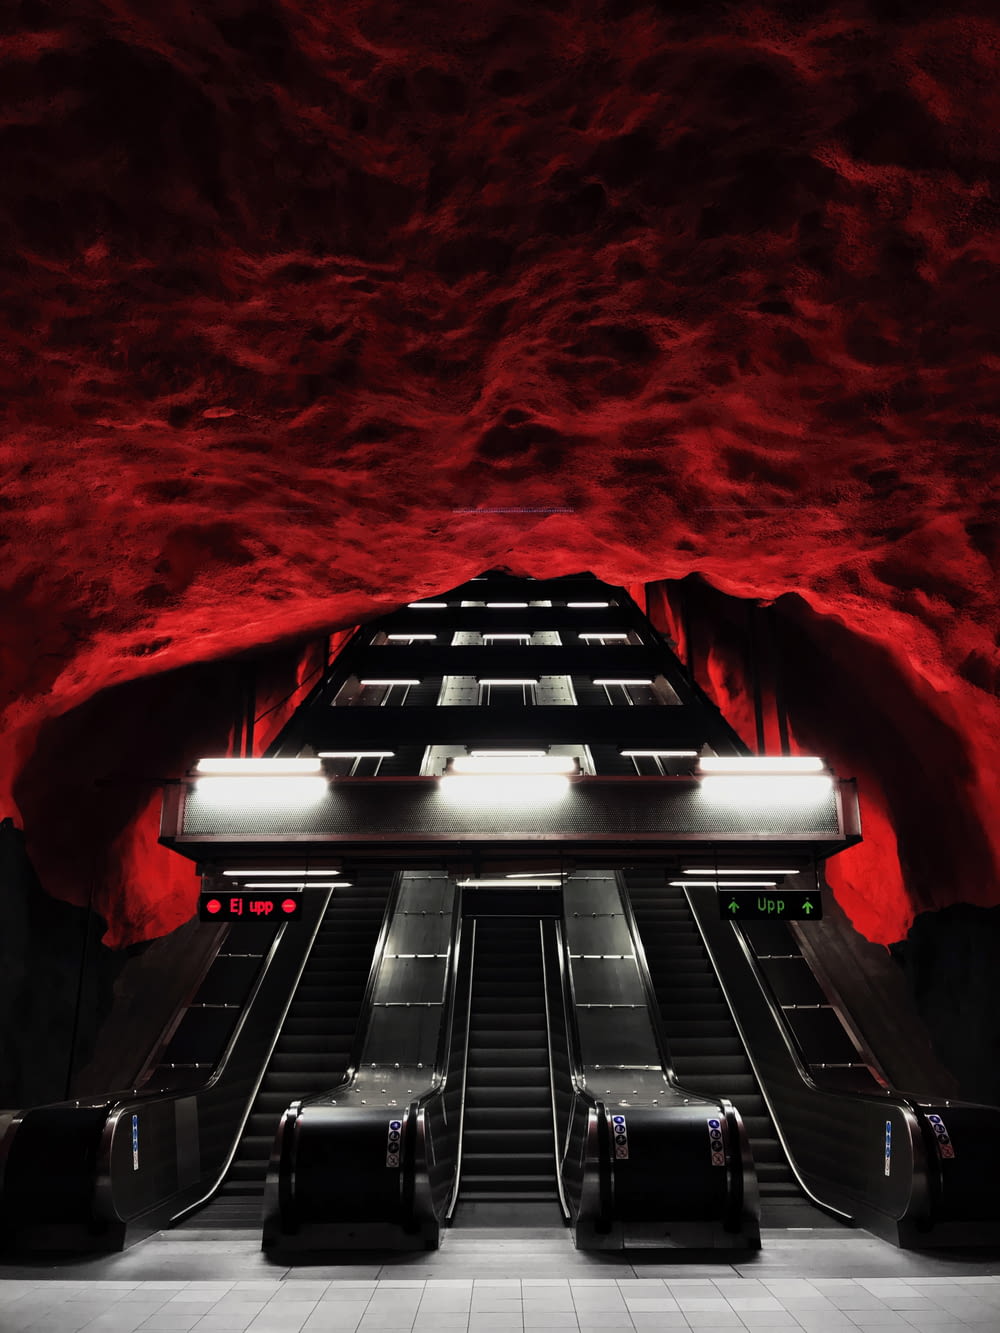 an escalator in a subway station with red walls